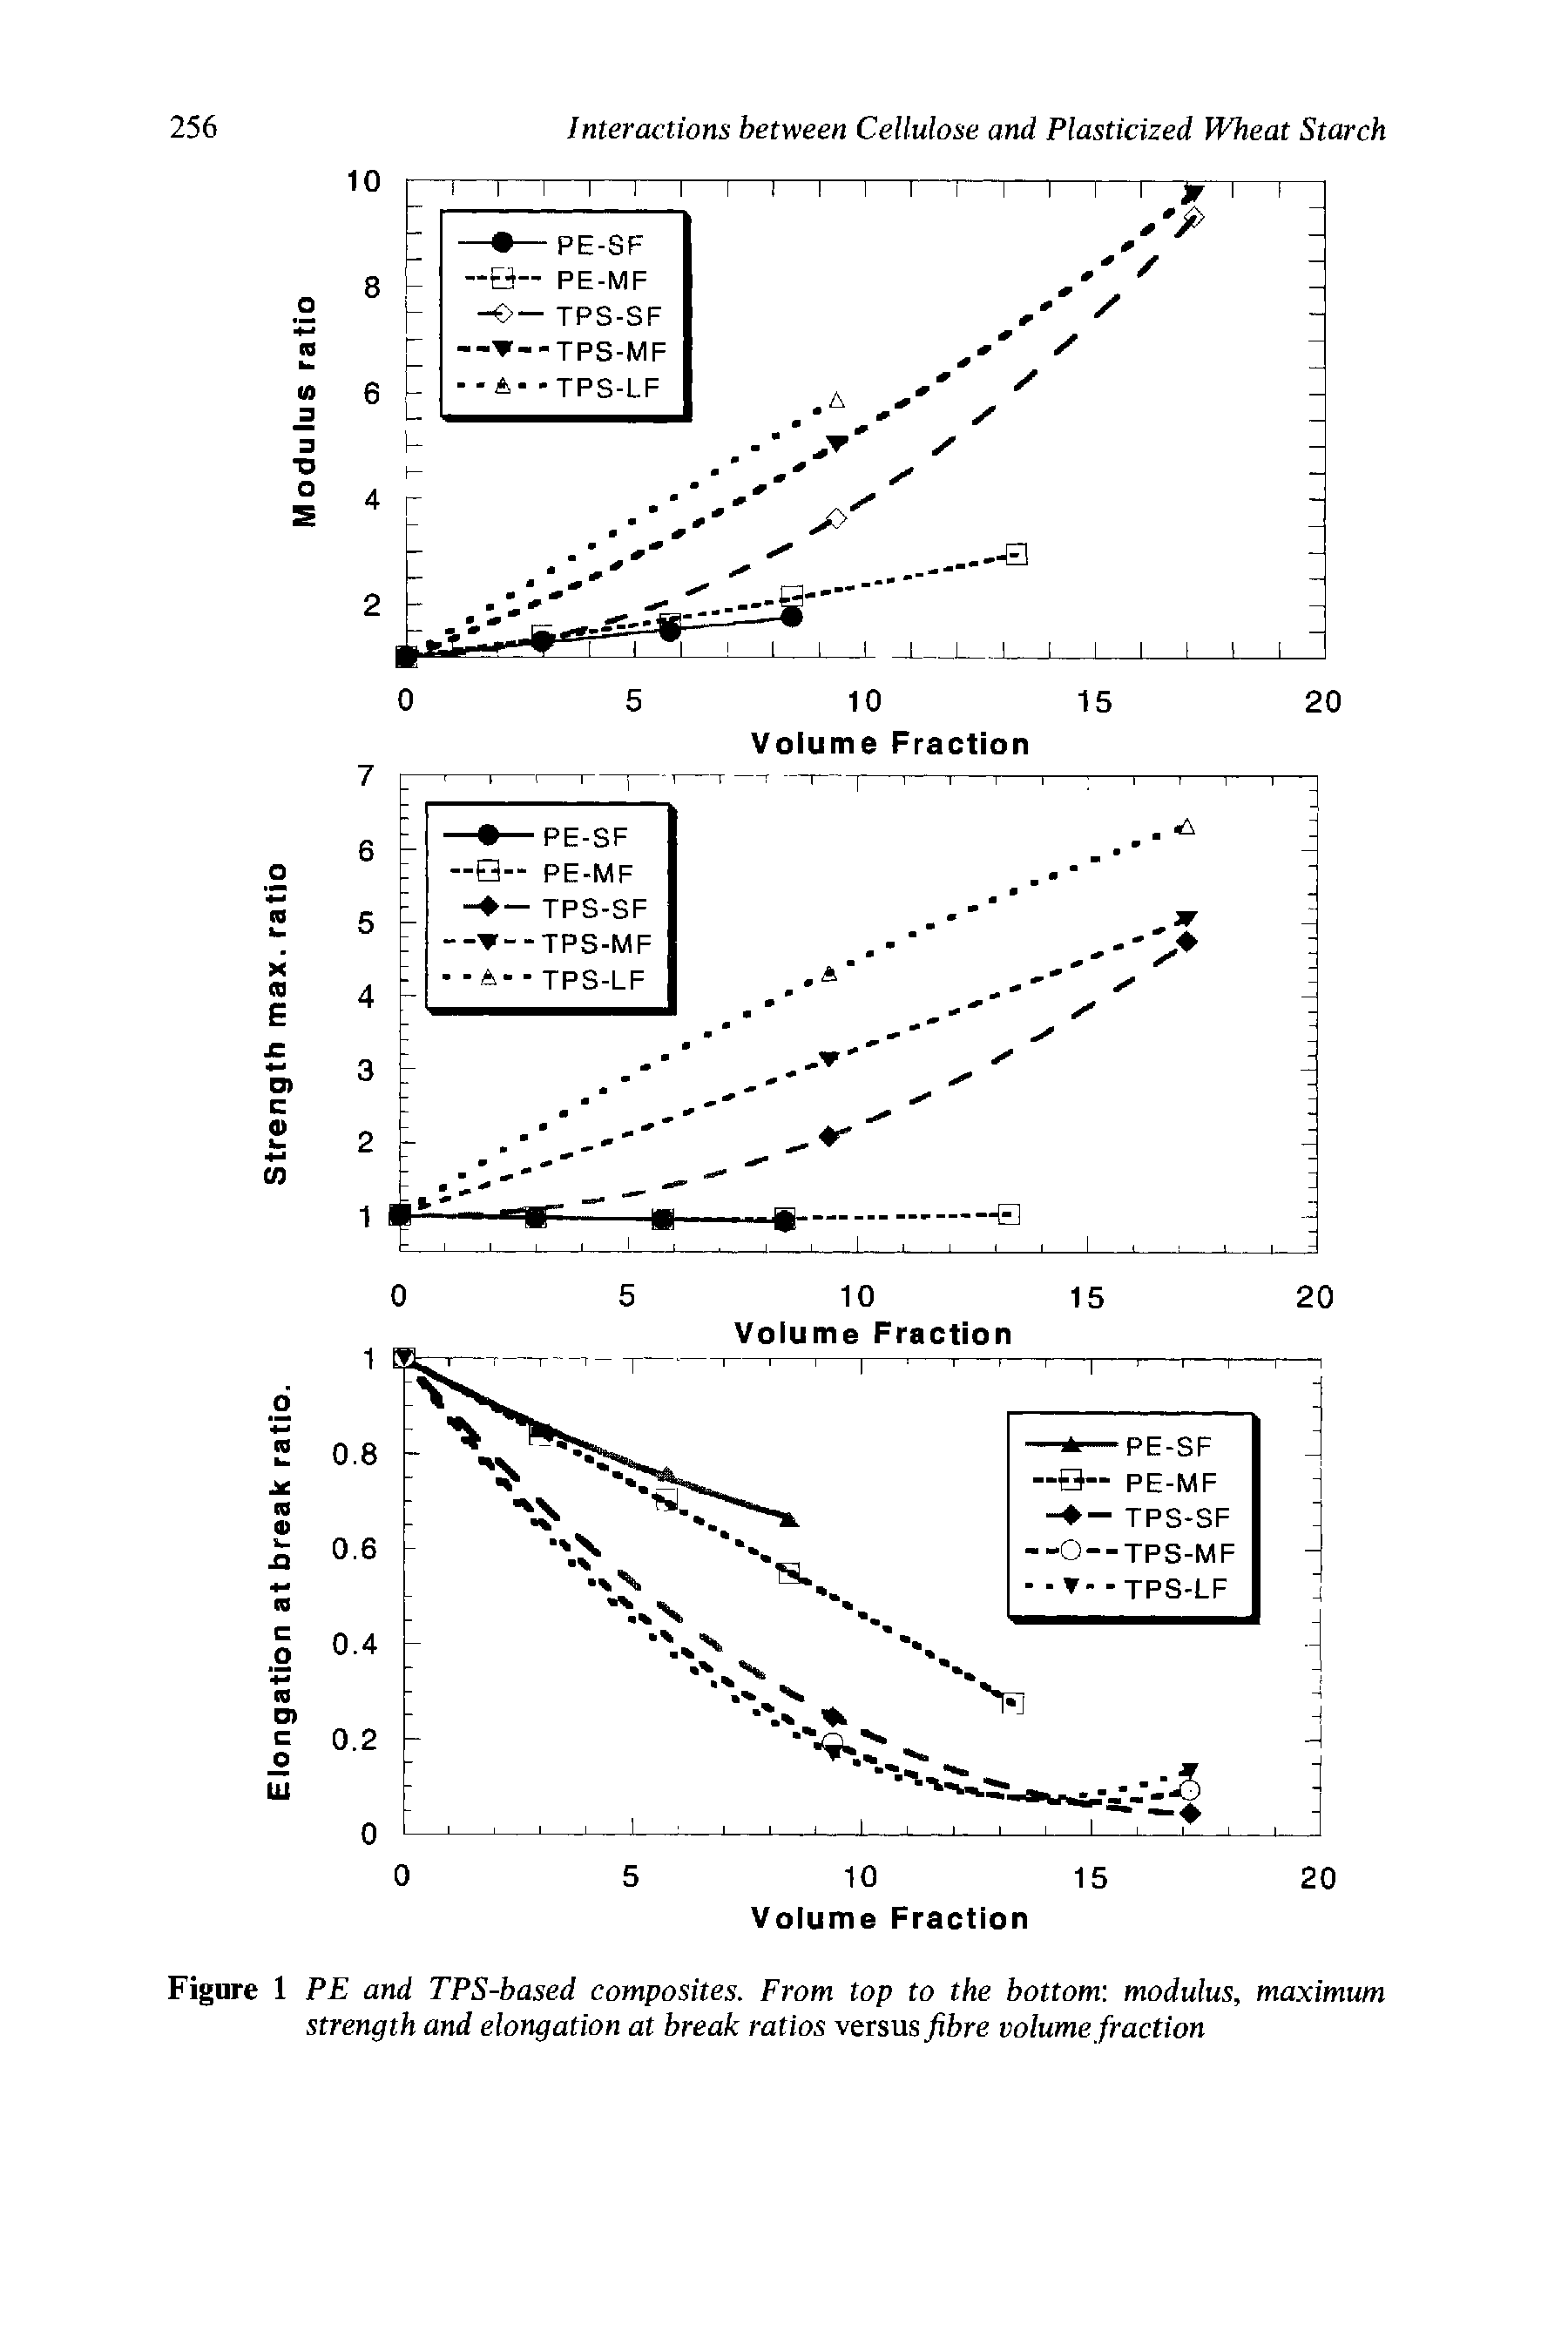 Figure 1 PE and TPS-based composites. From top to the bottom modulus, maximum strength and elongation at break ratios versus fibre volume fraction...